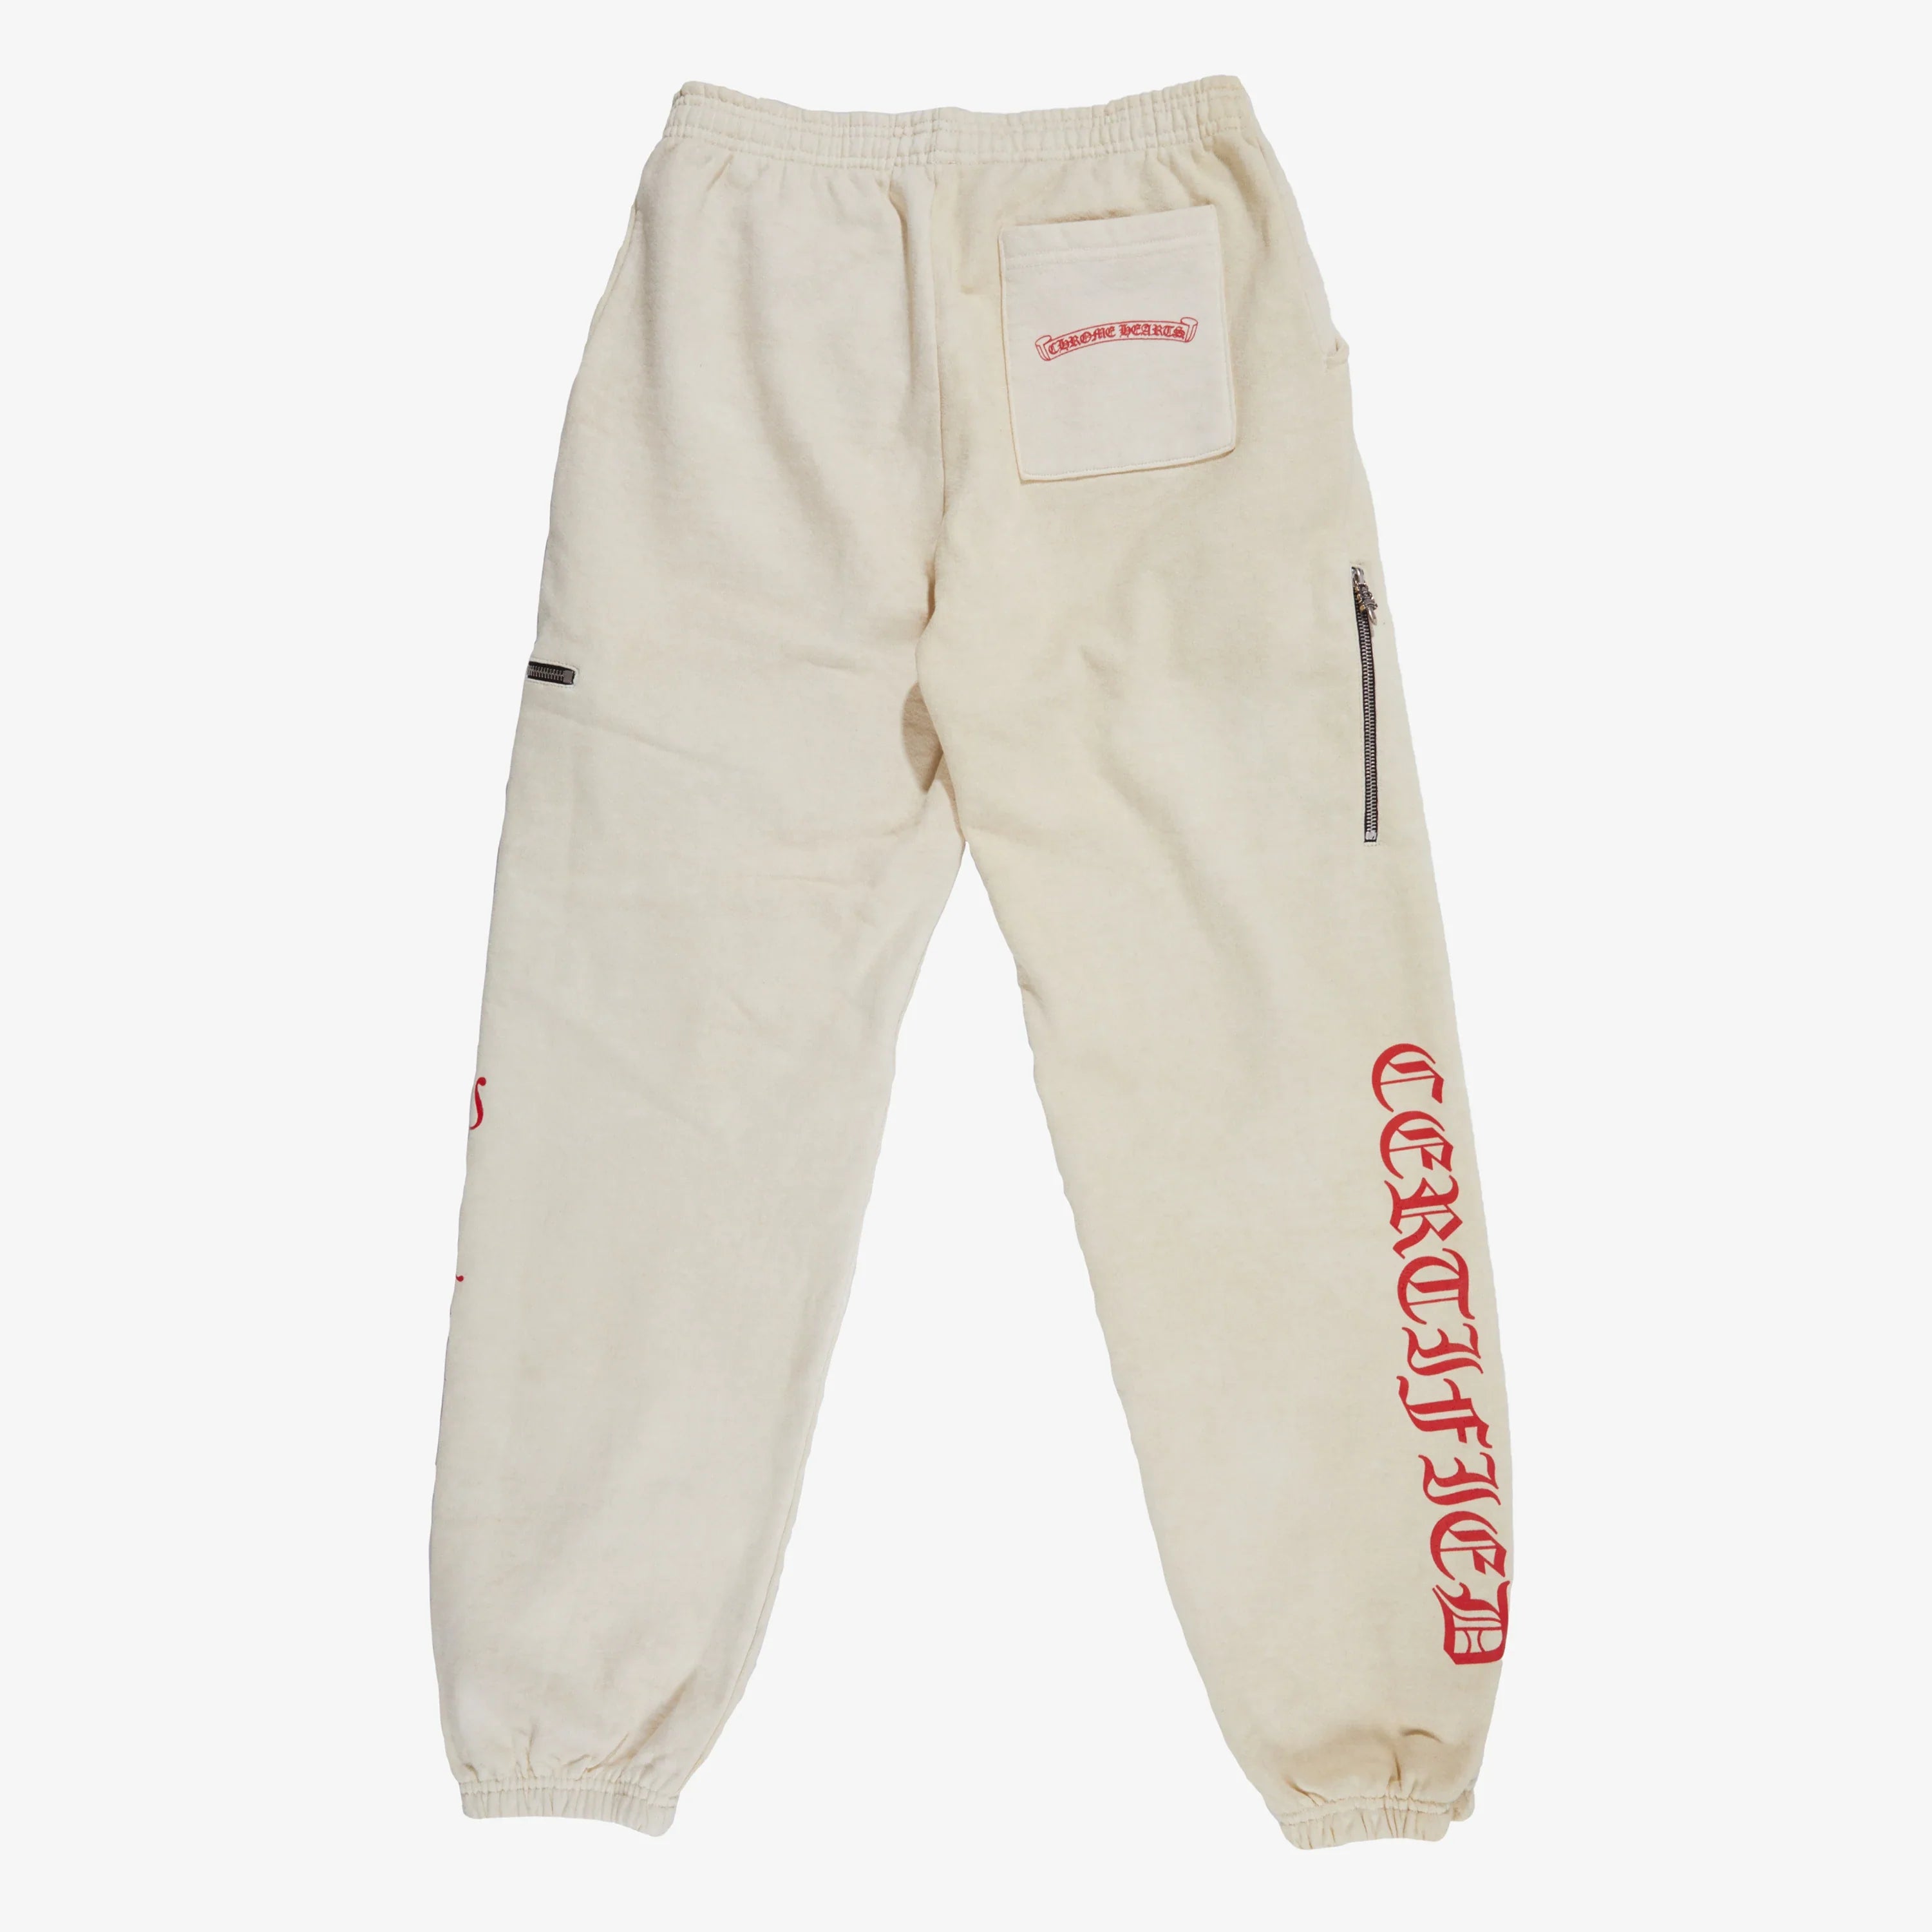 x DRAKE CLB FRIENDS AND FAMILY SWEATPANT